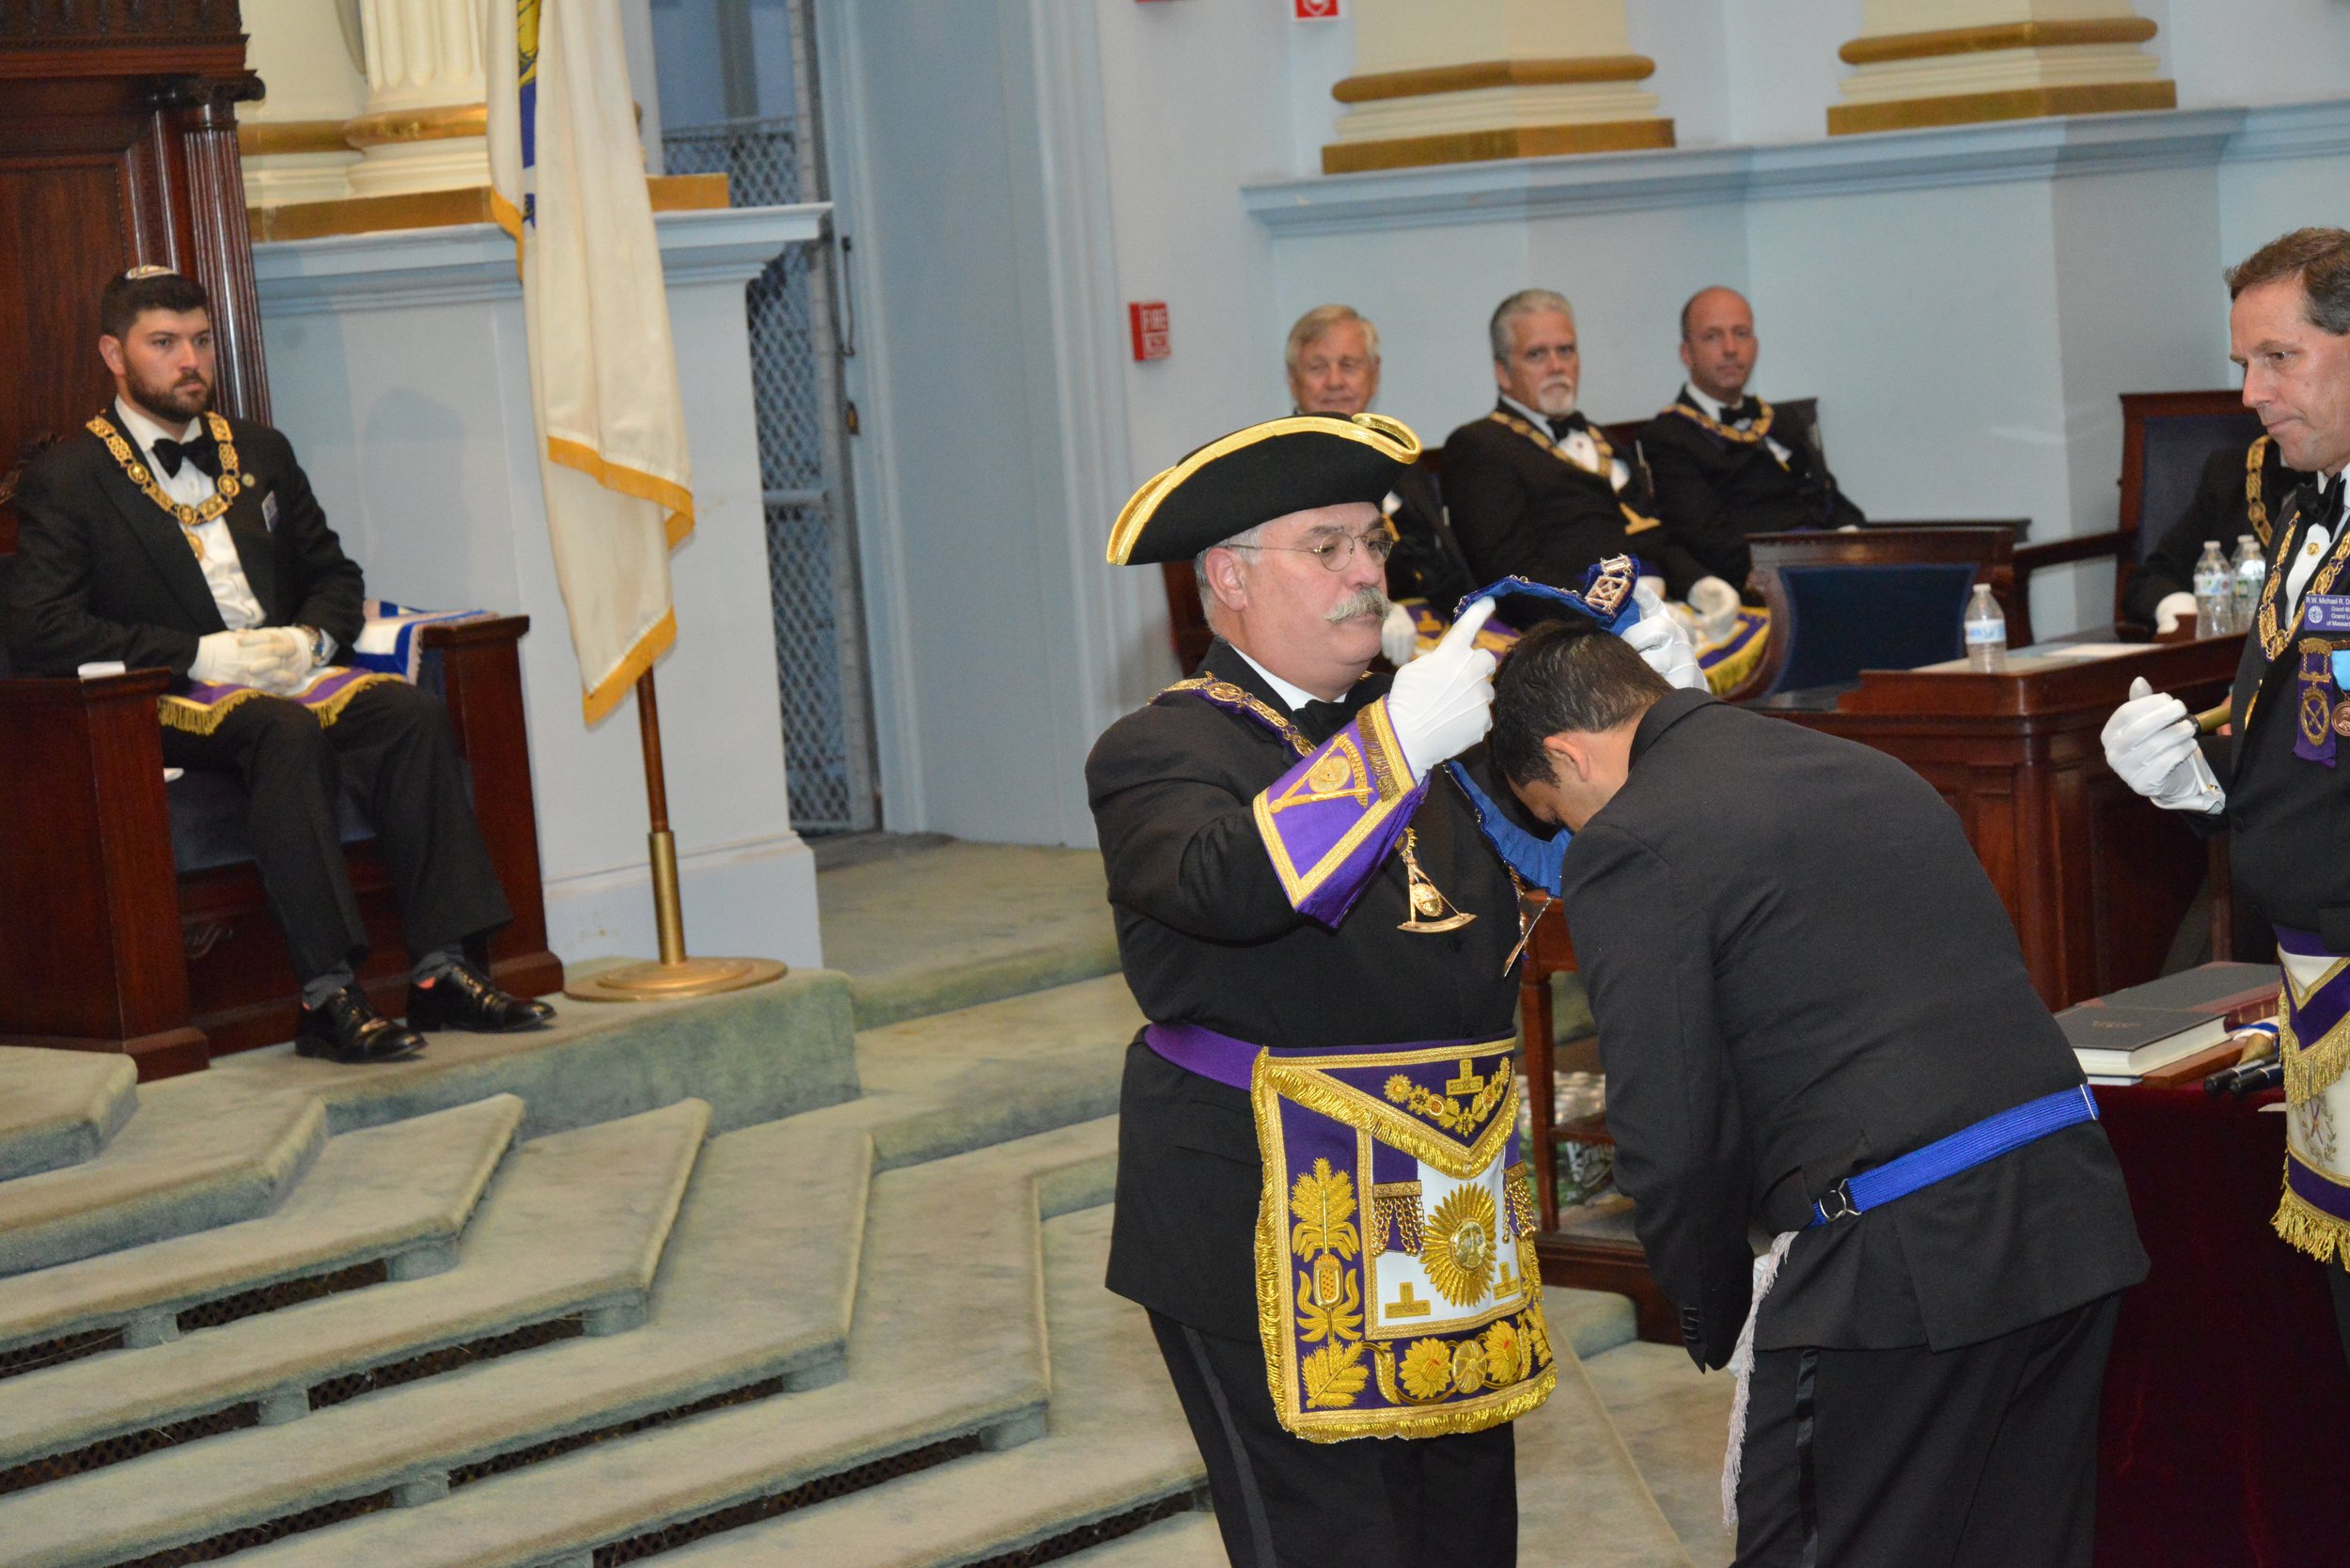  The Grand Master investing the Worshipful Master with the jewel of his office, the Square 